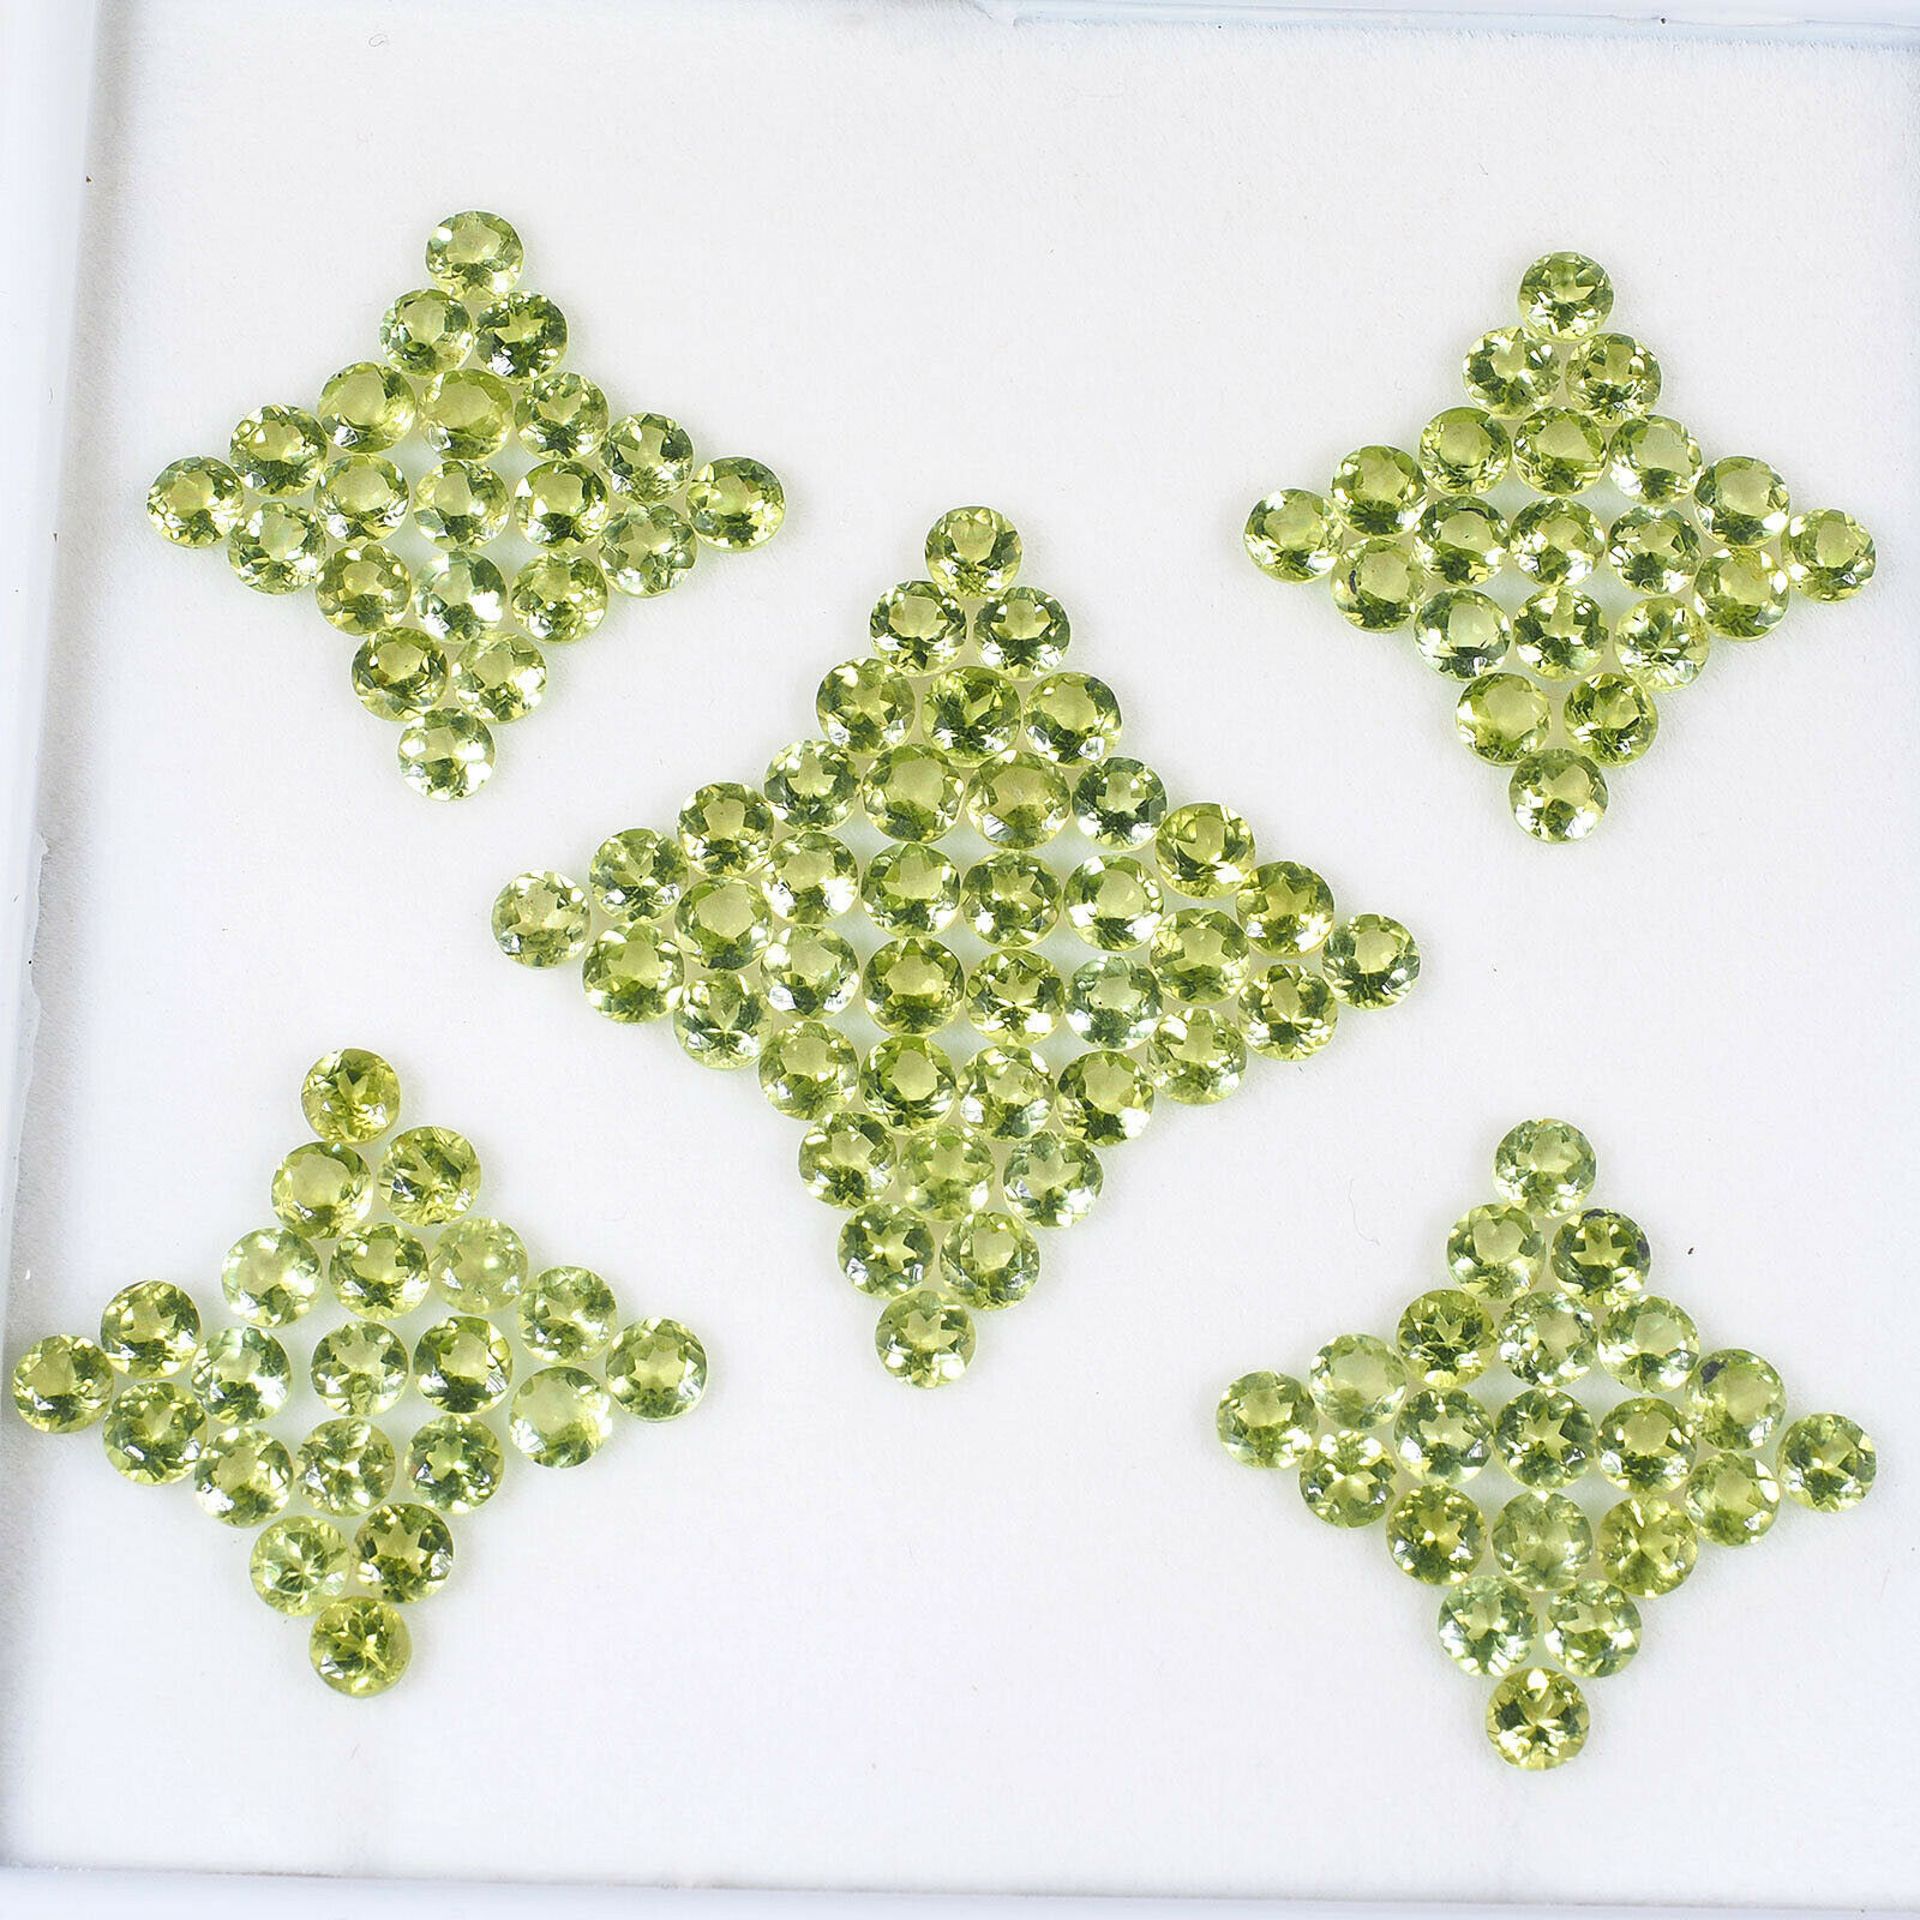 IGL&I Certified, A Company part of the GIA organisation, Natural Peridot 37.60 carat 123pieces - A